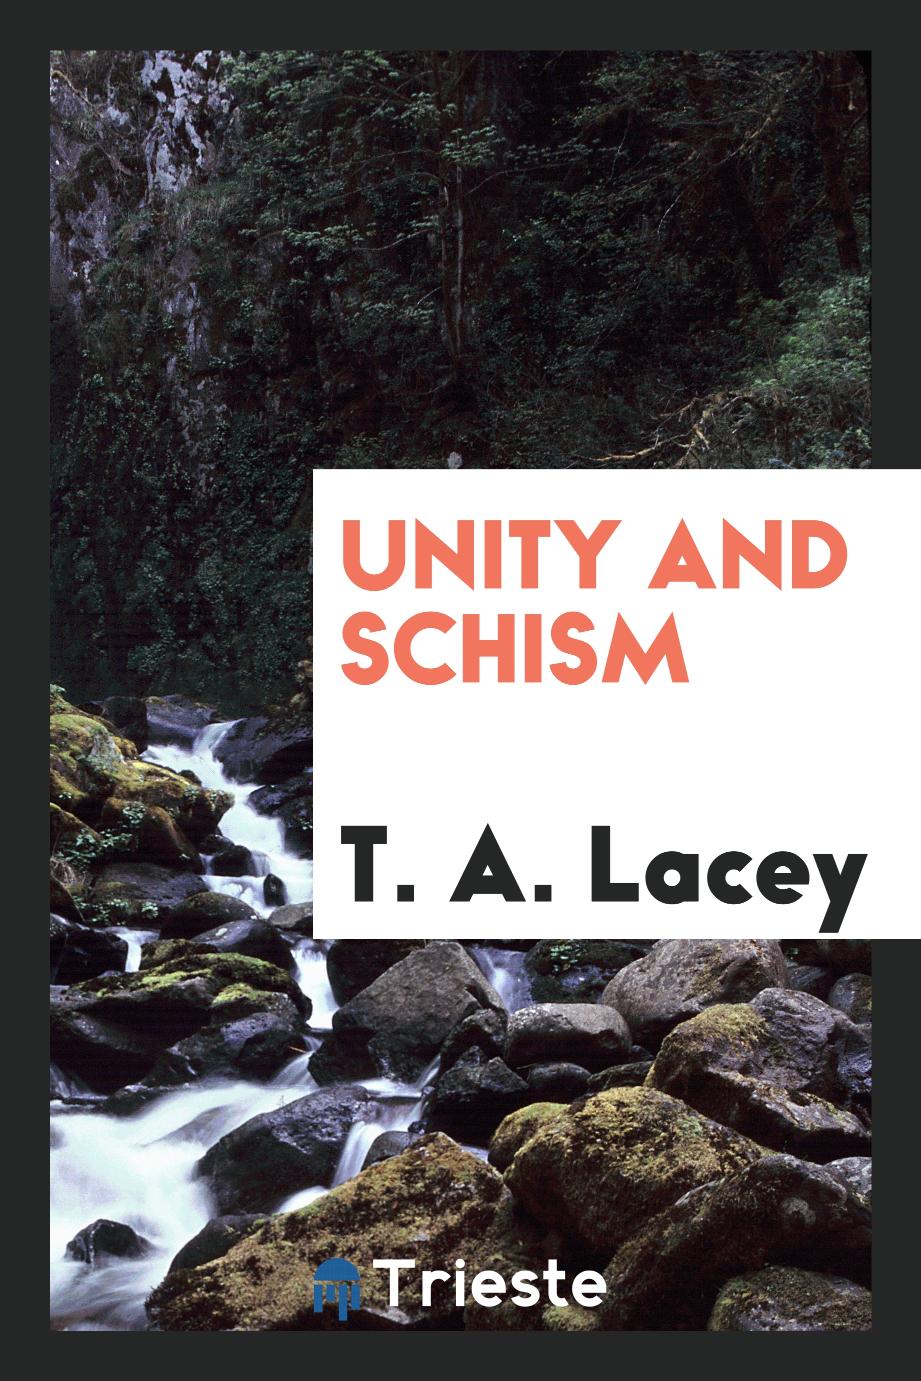 Unity and schism